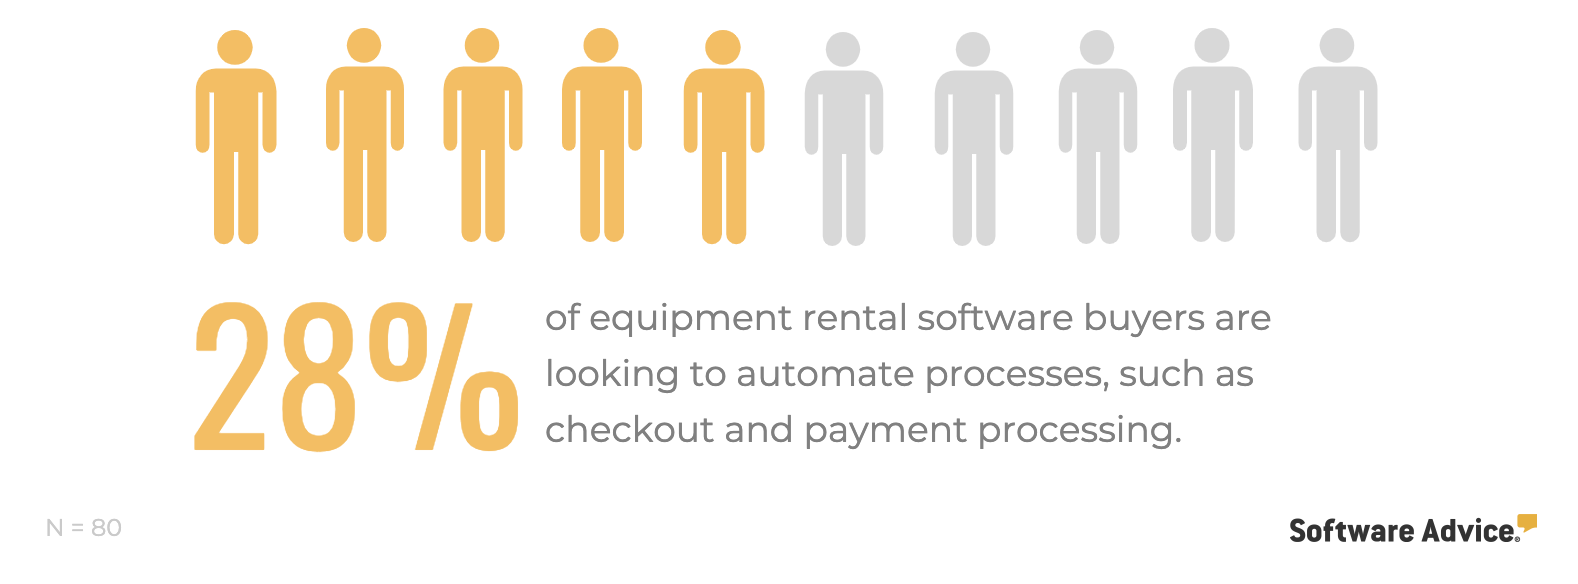 equipment-rental-software-buyers-automate-automation-processes